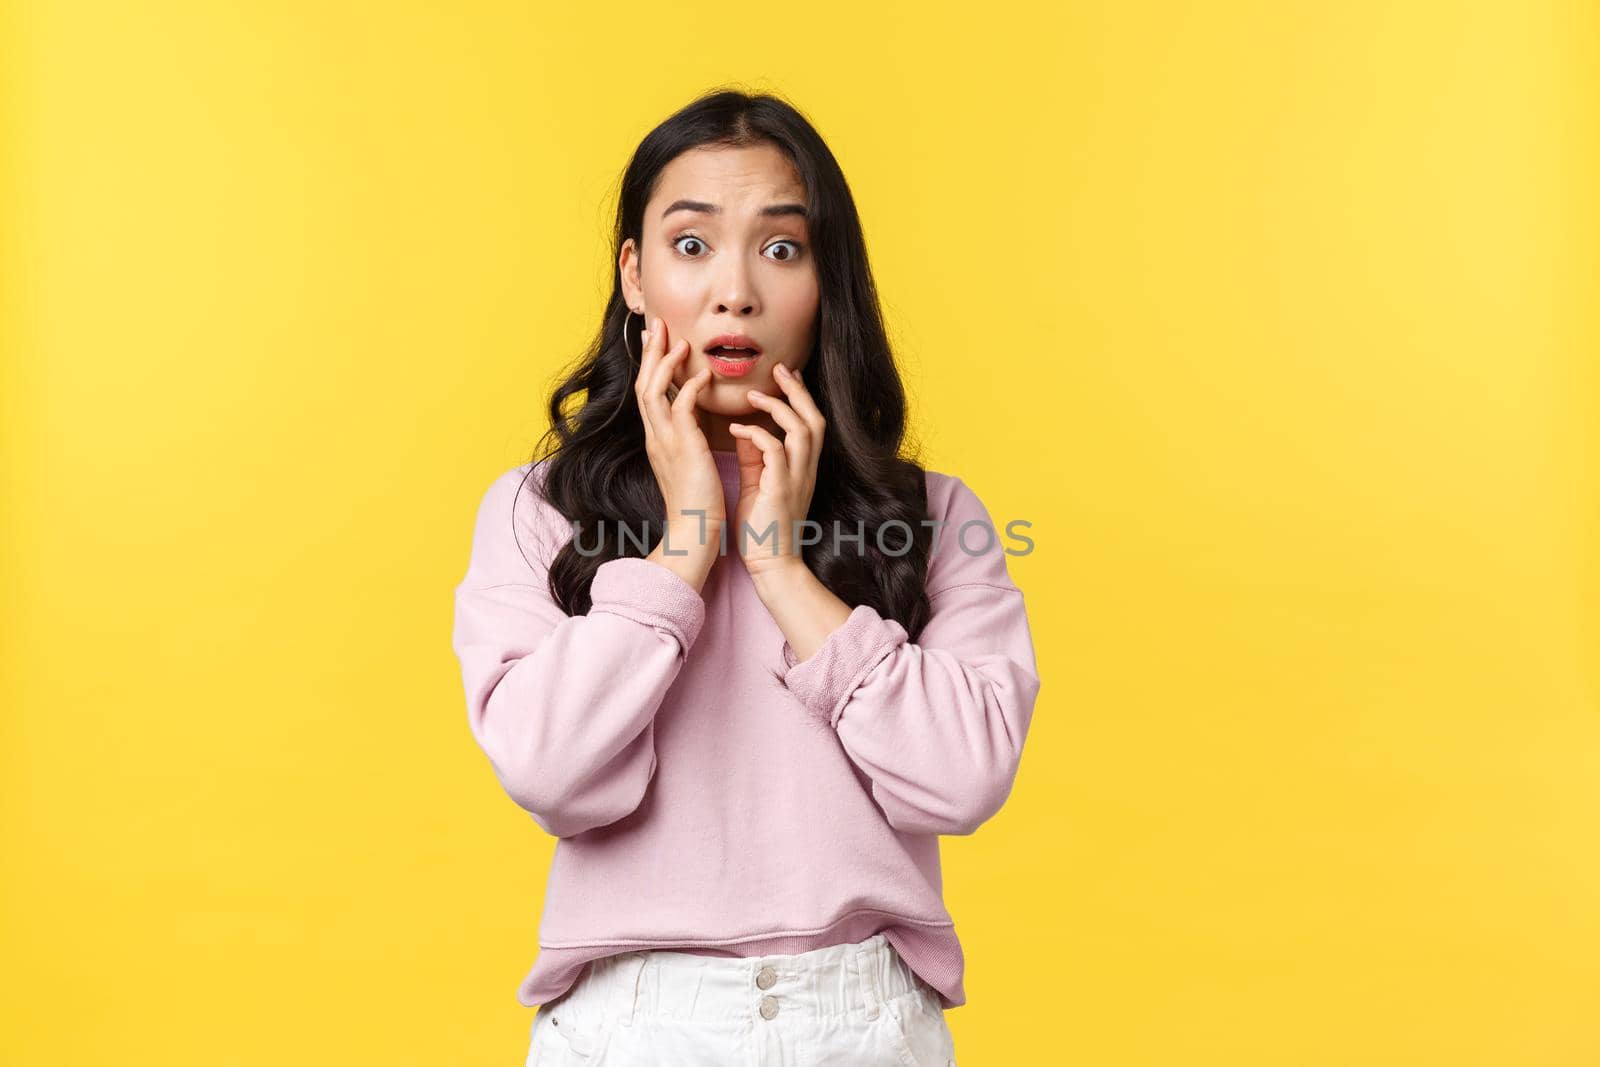 People emotions, lifestyle and fashion concept. Shocked and concerned insecure asian woman react to bad shocking news, gasping and touching face, stare anxious at camera, yellow background.